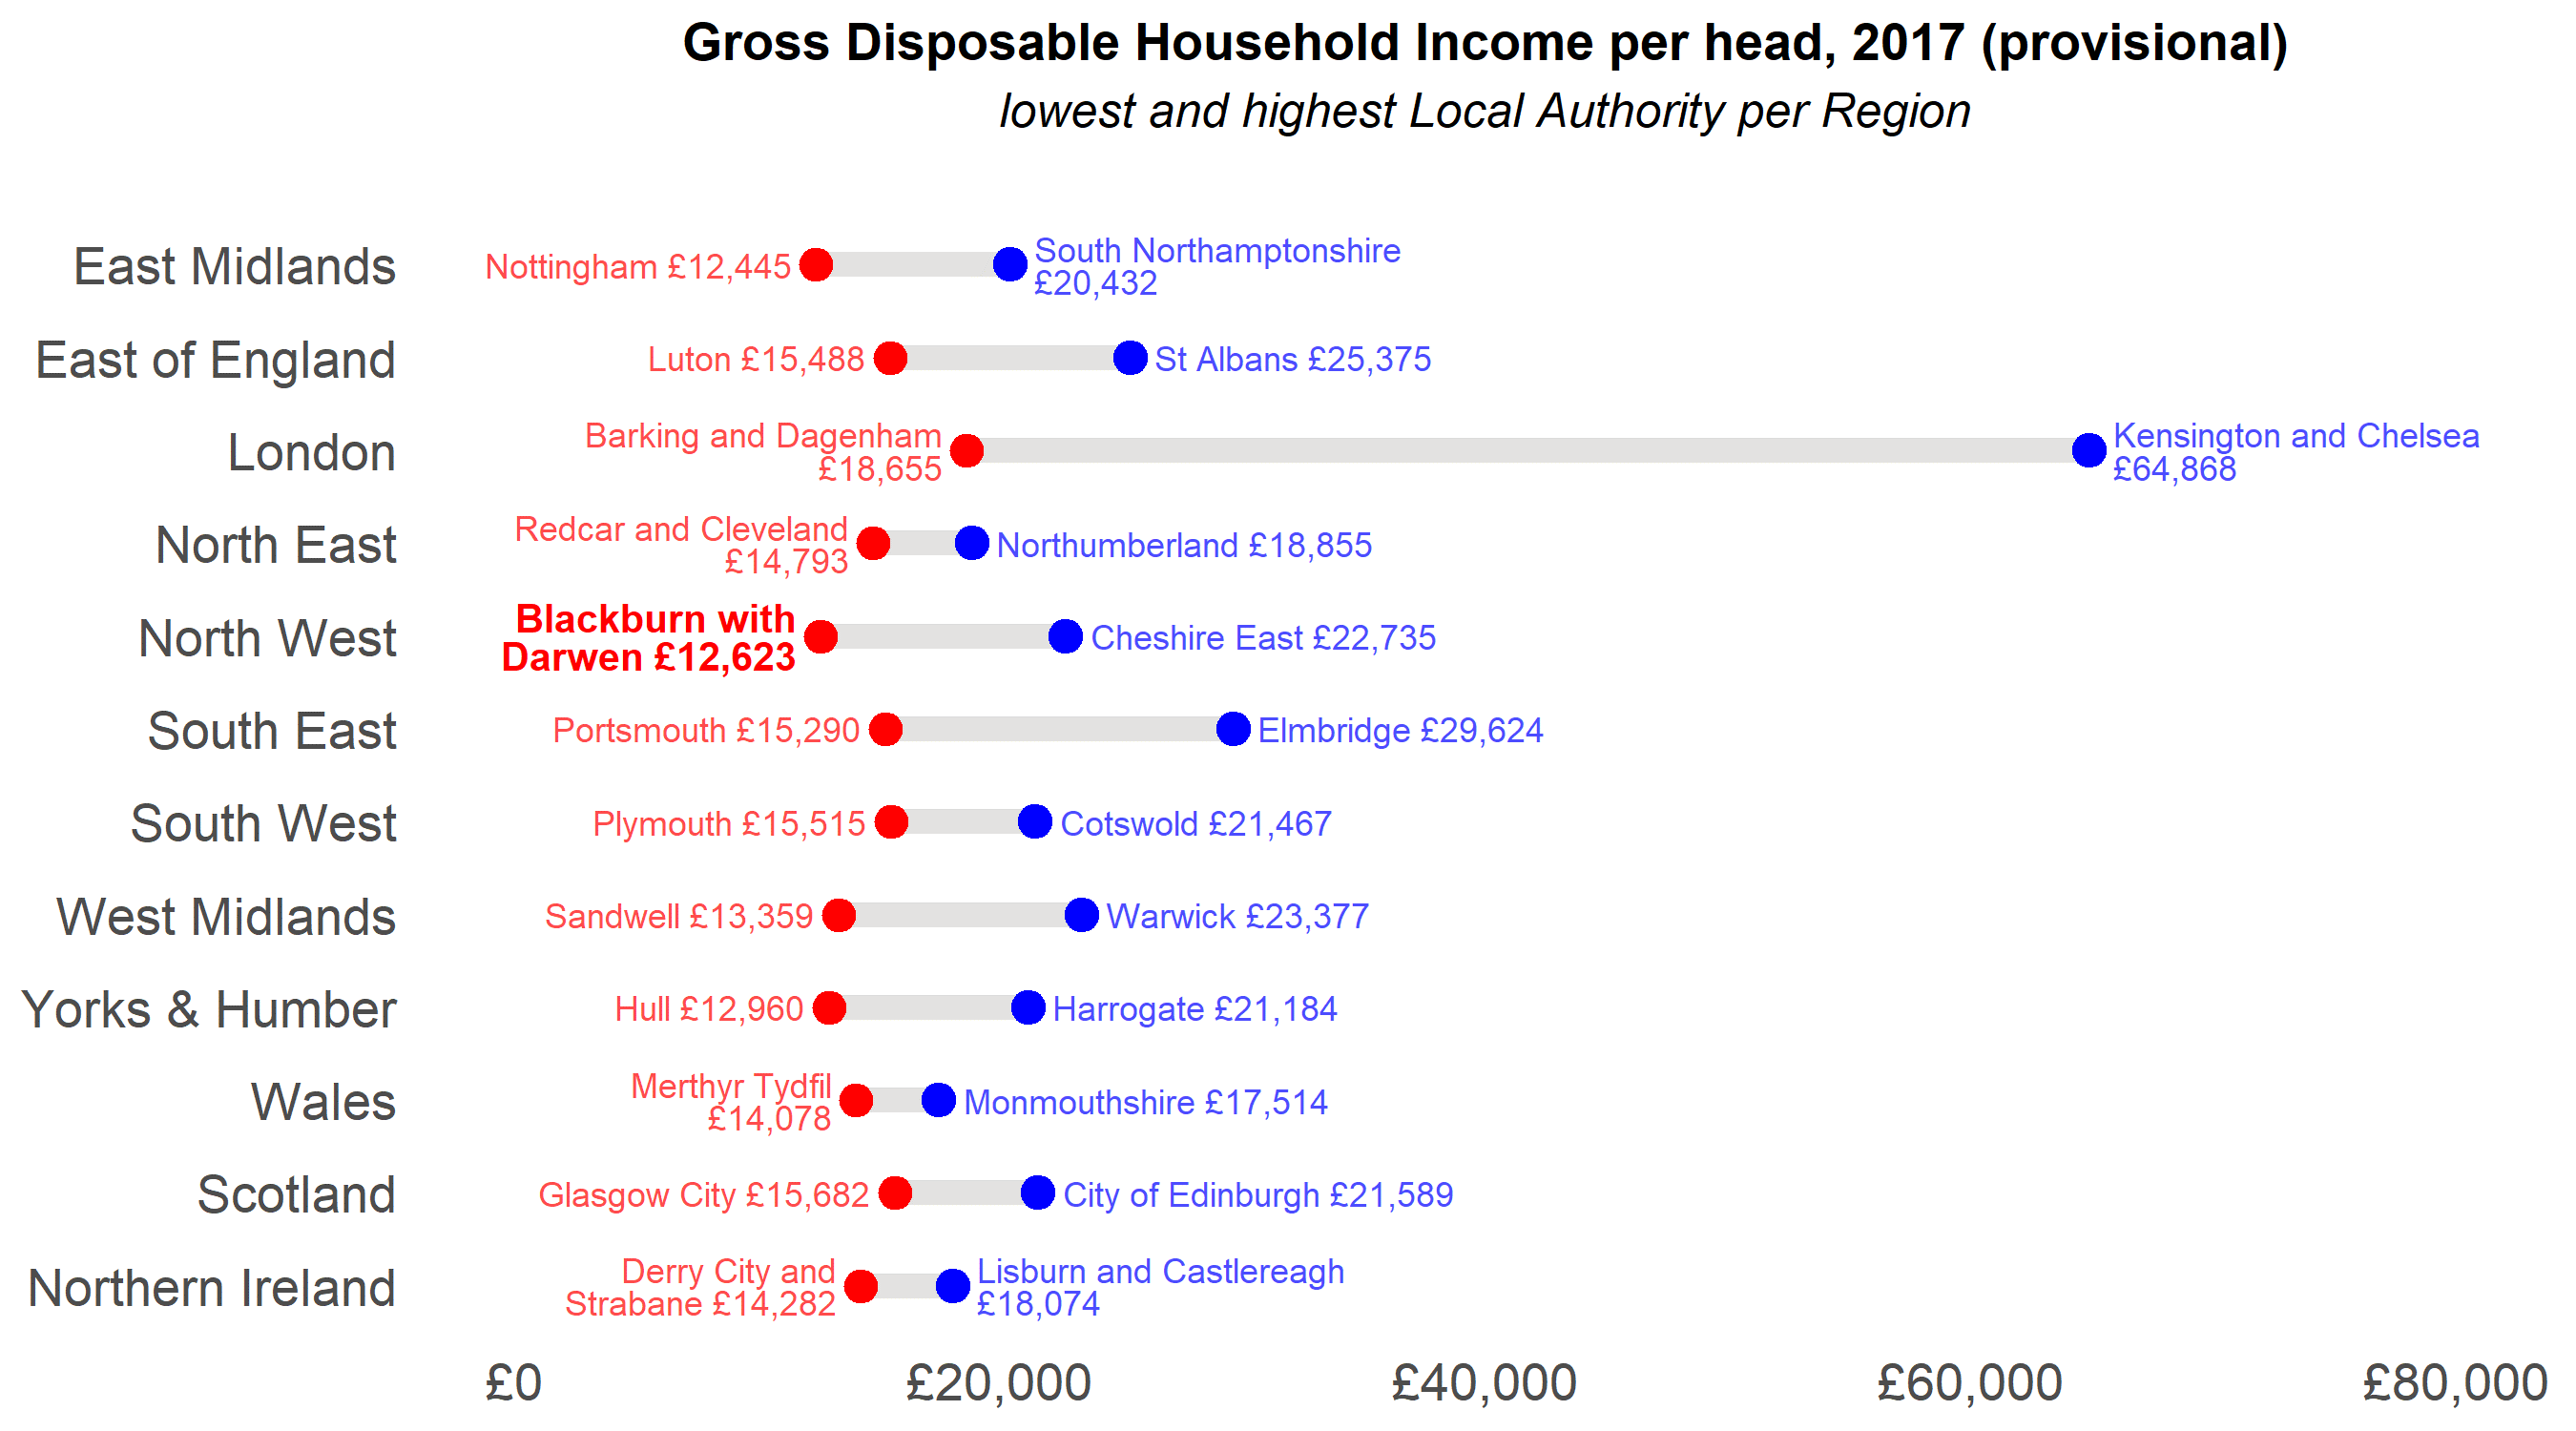 Gross Disposable Household Income per head (2017, provisional): lowest and highest local authority per region